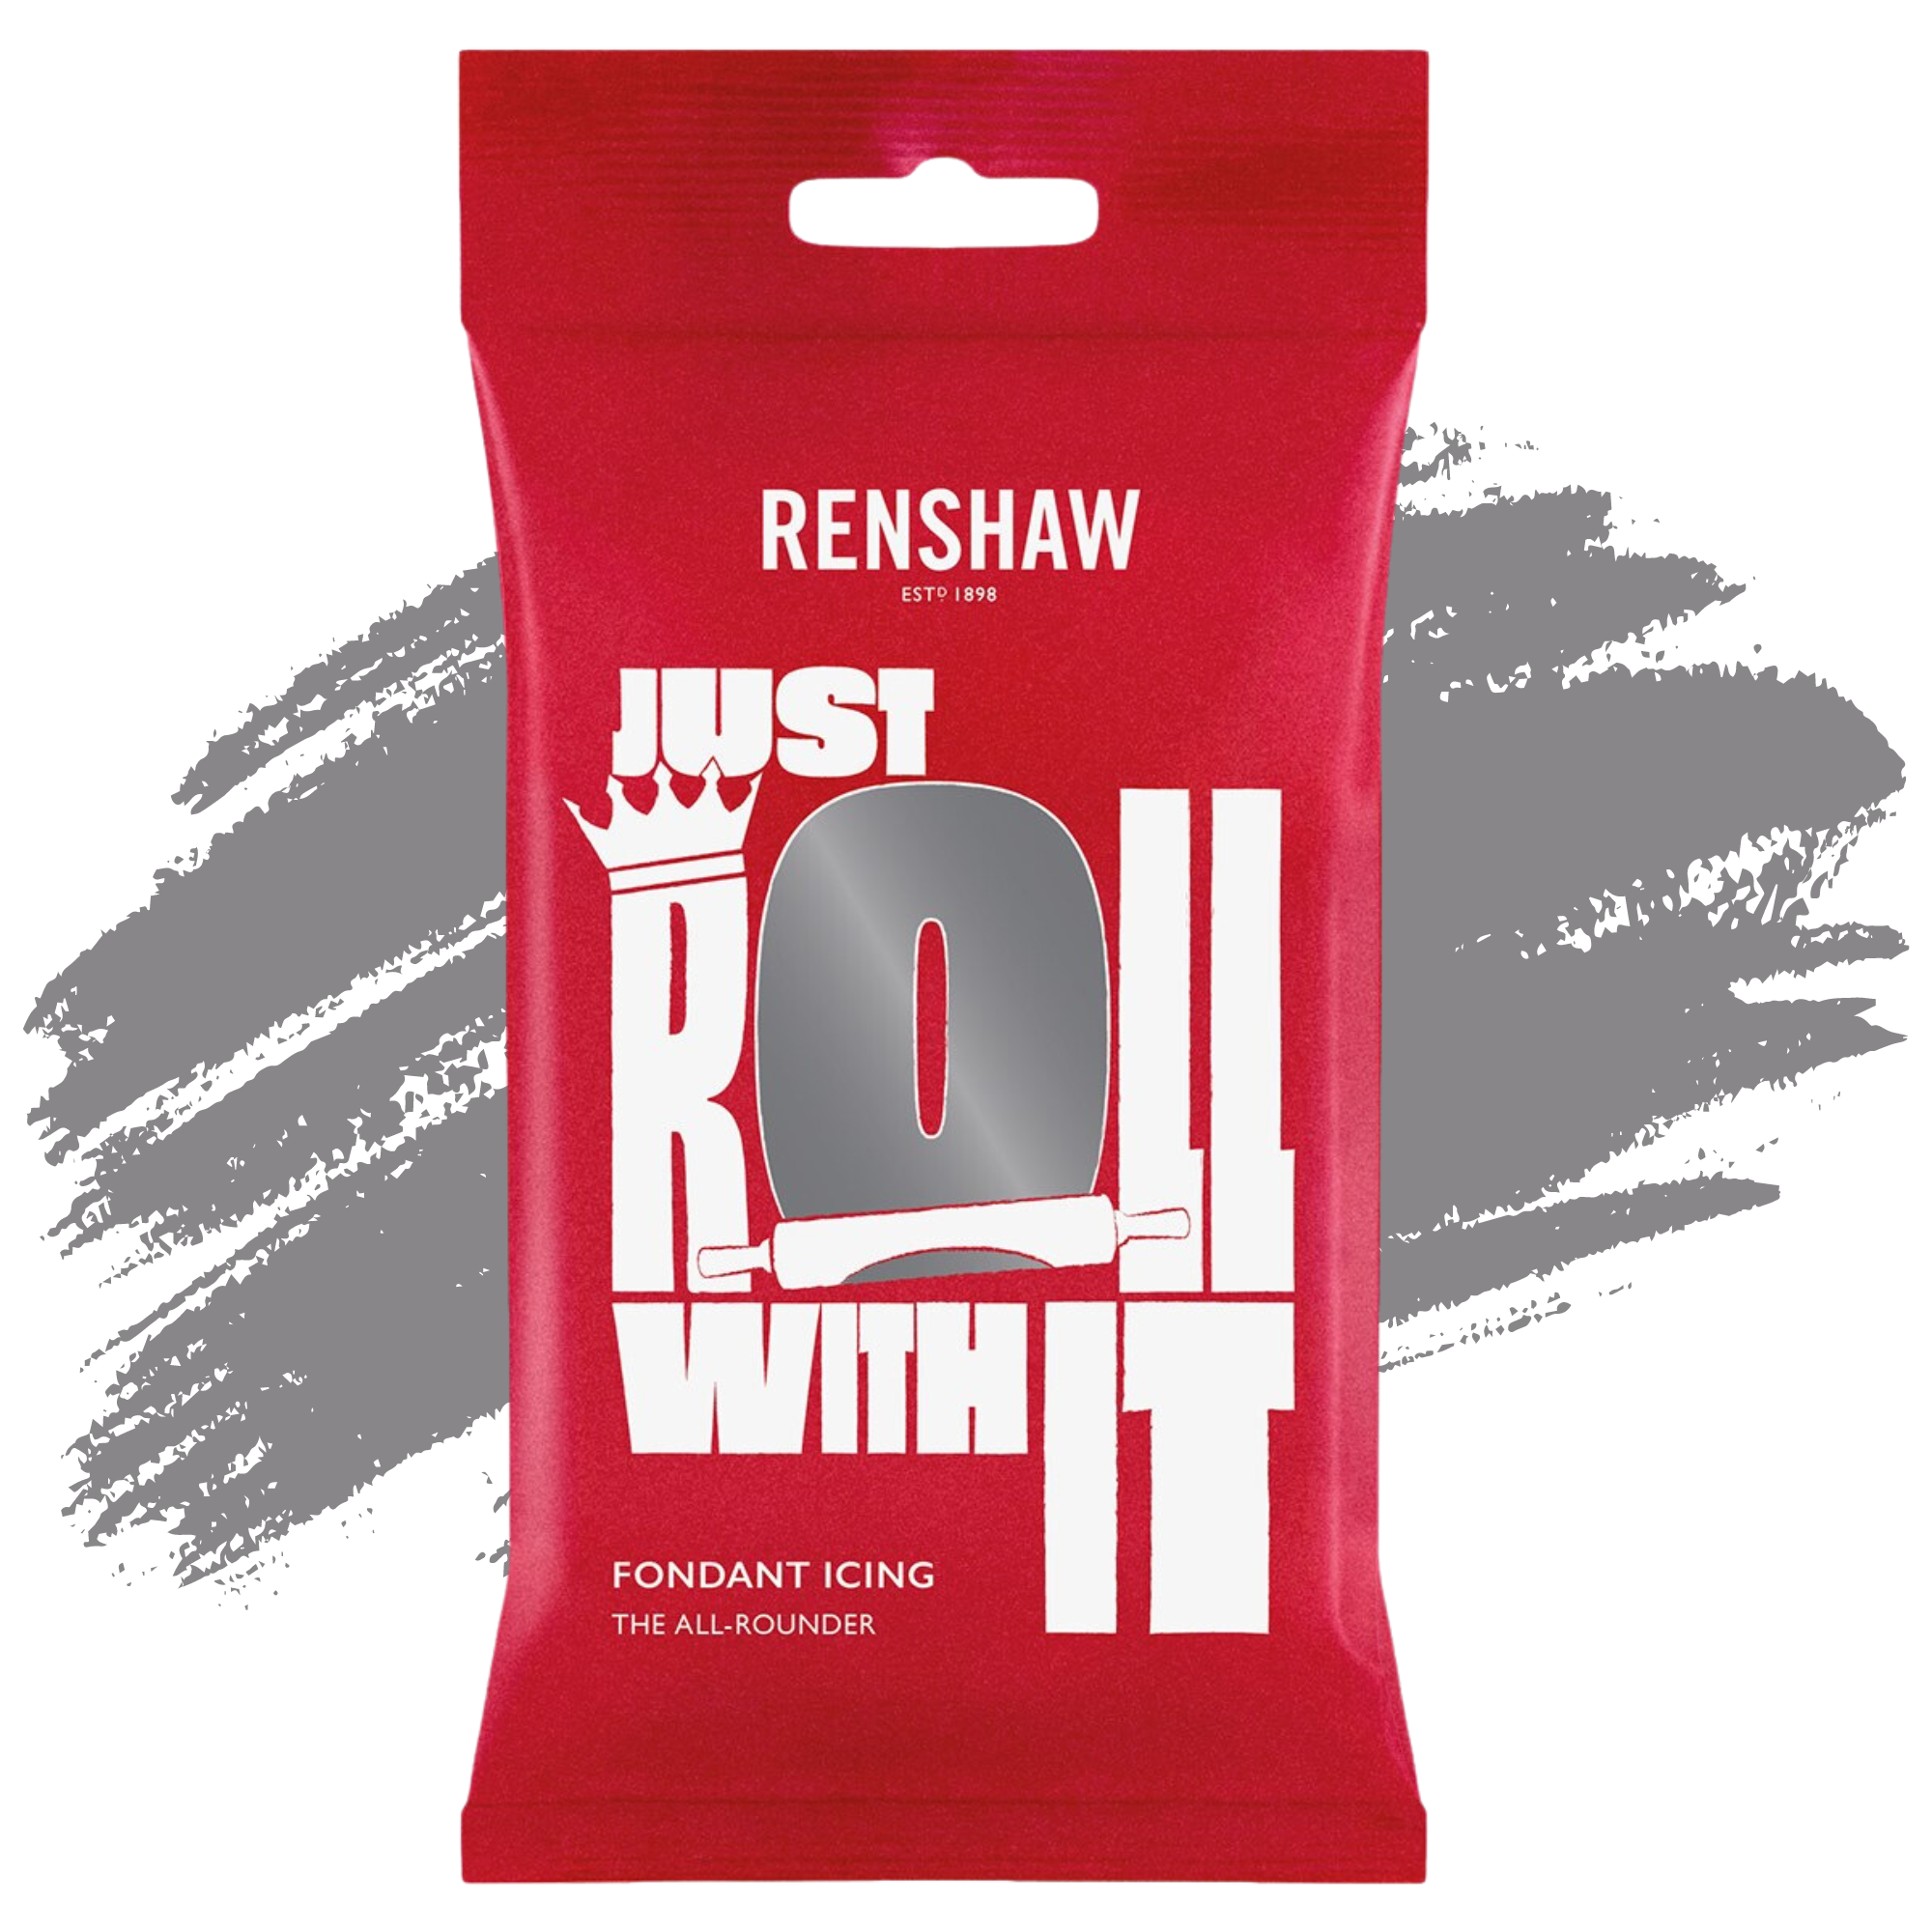 Renshaw Professional Sugar Paste Ready to Roll Fondant Just Roll with it Icing - Grey - 250g